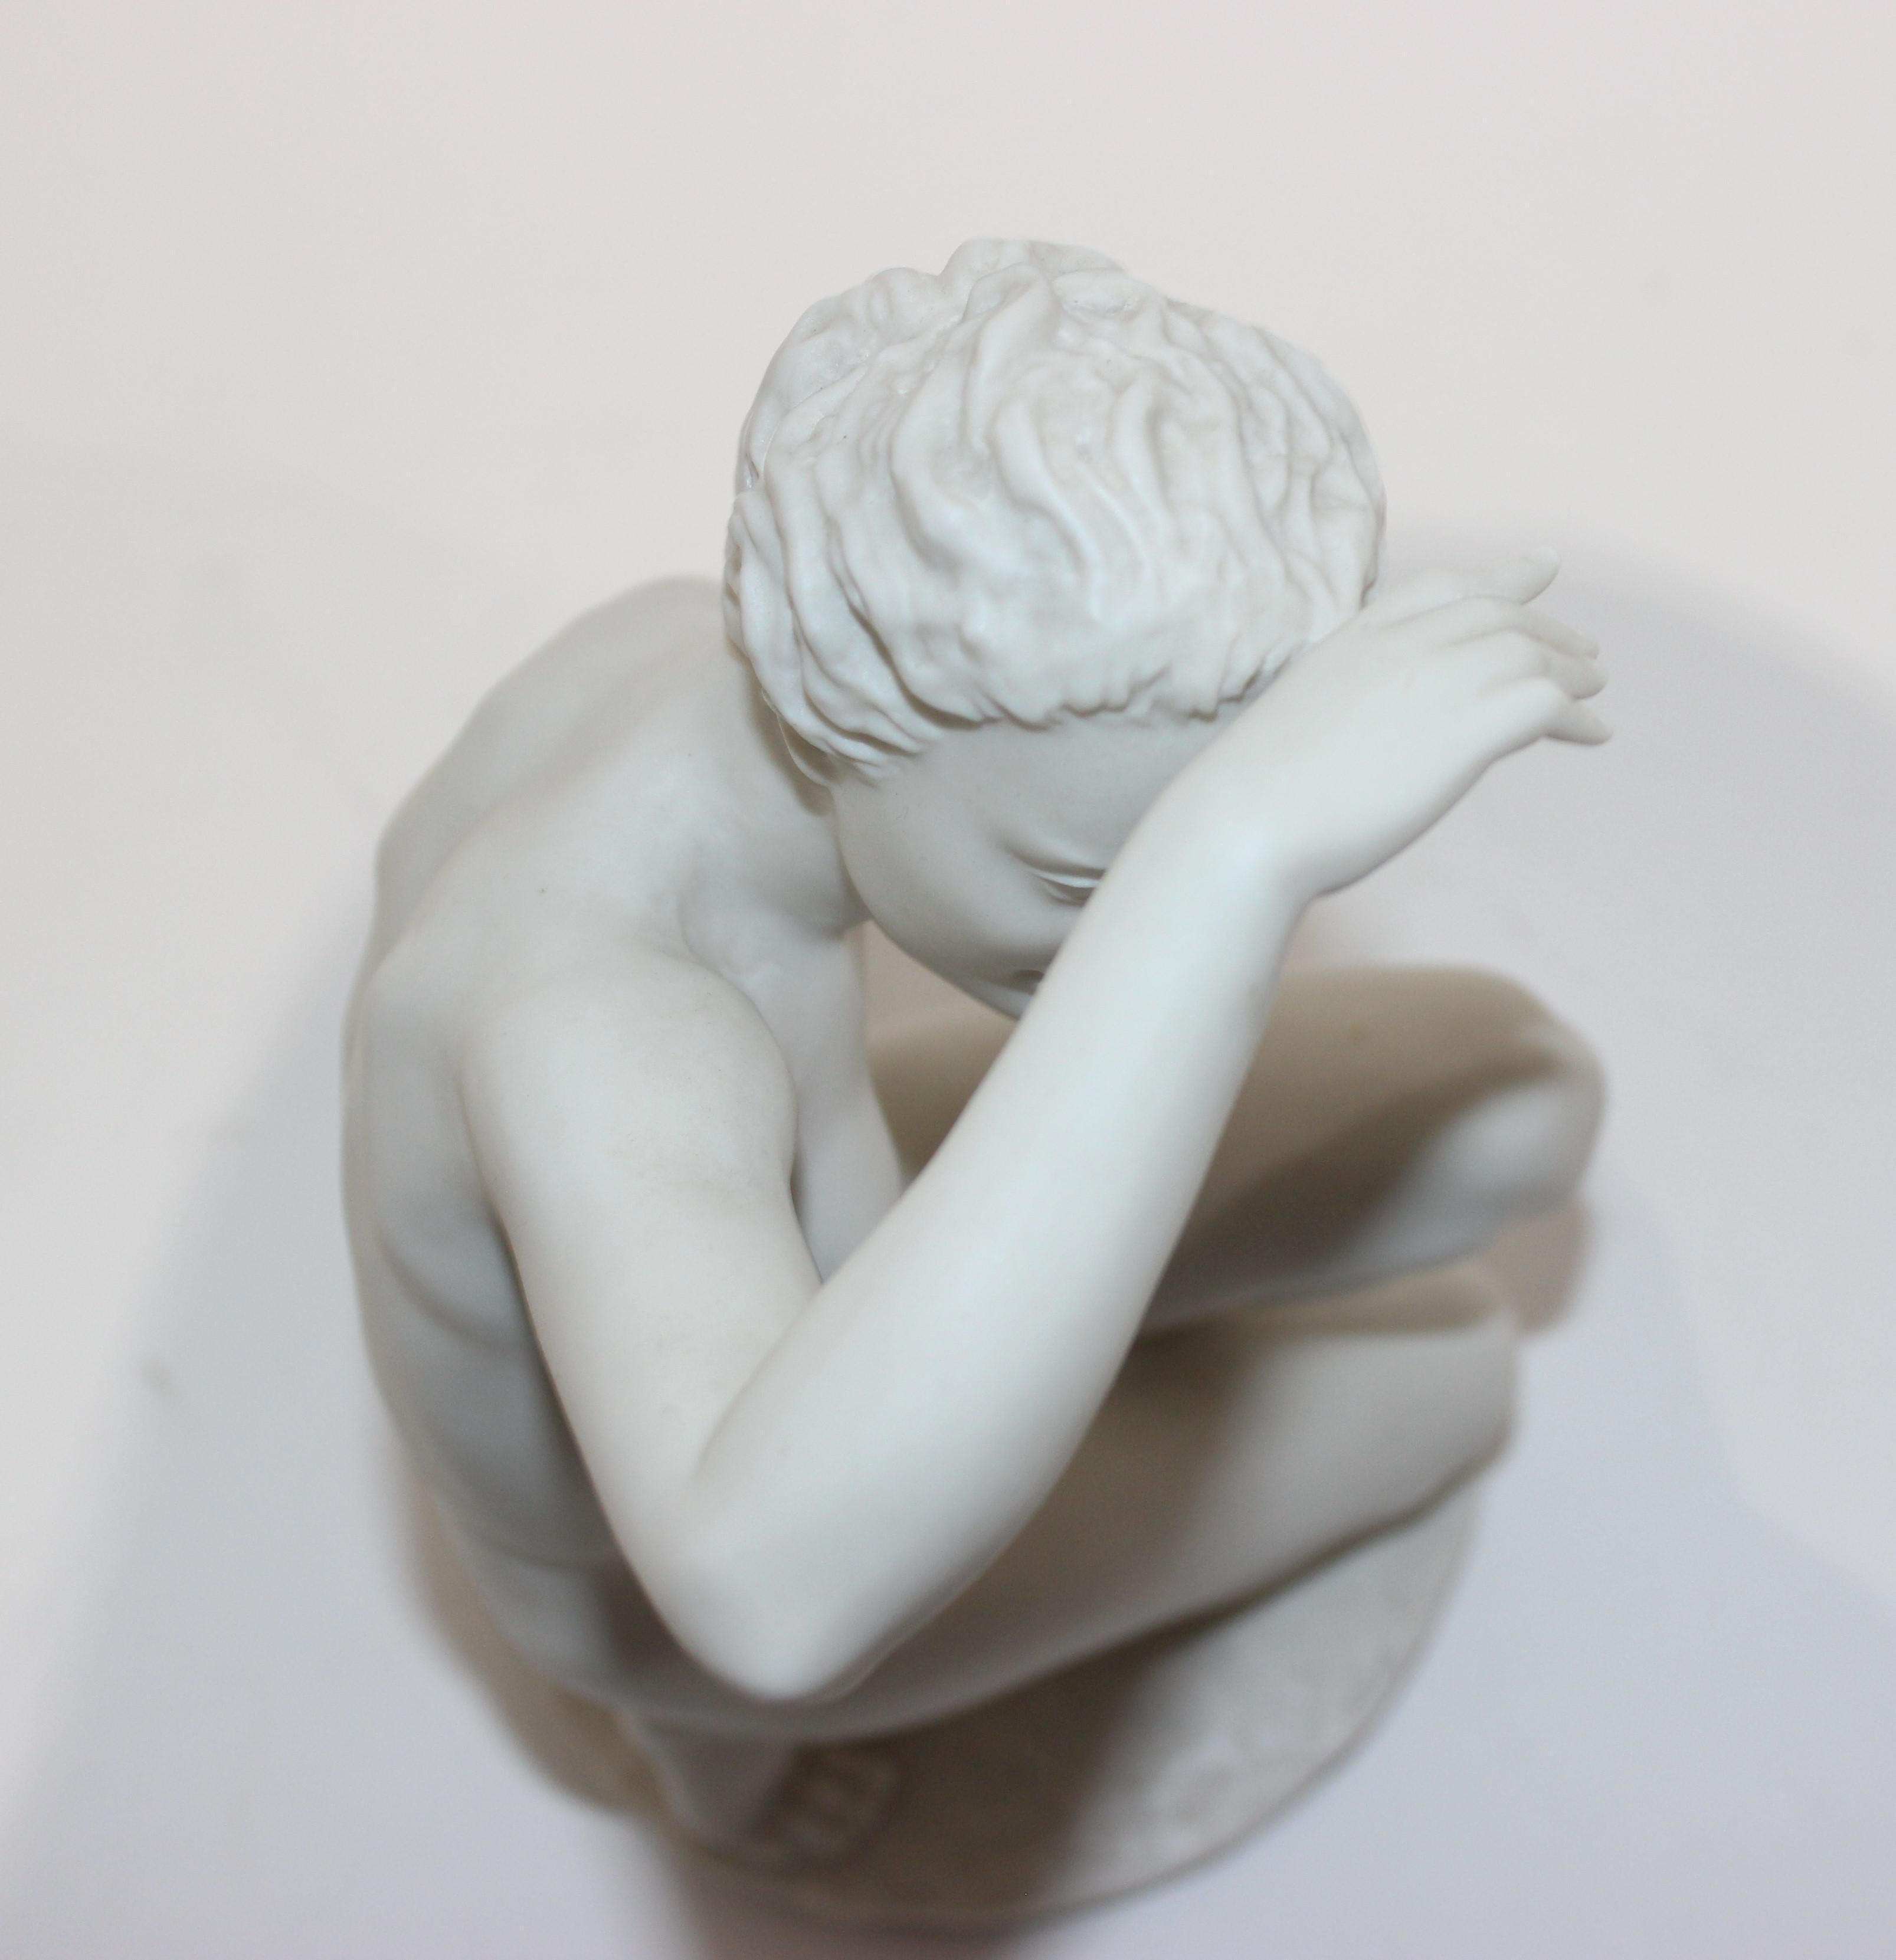 Molded Bisque Figure of a Female Nude by Lorenz Hutschenreutner For Sale